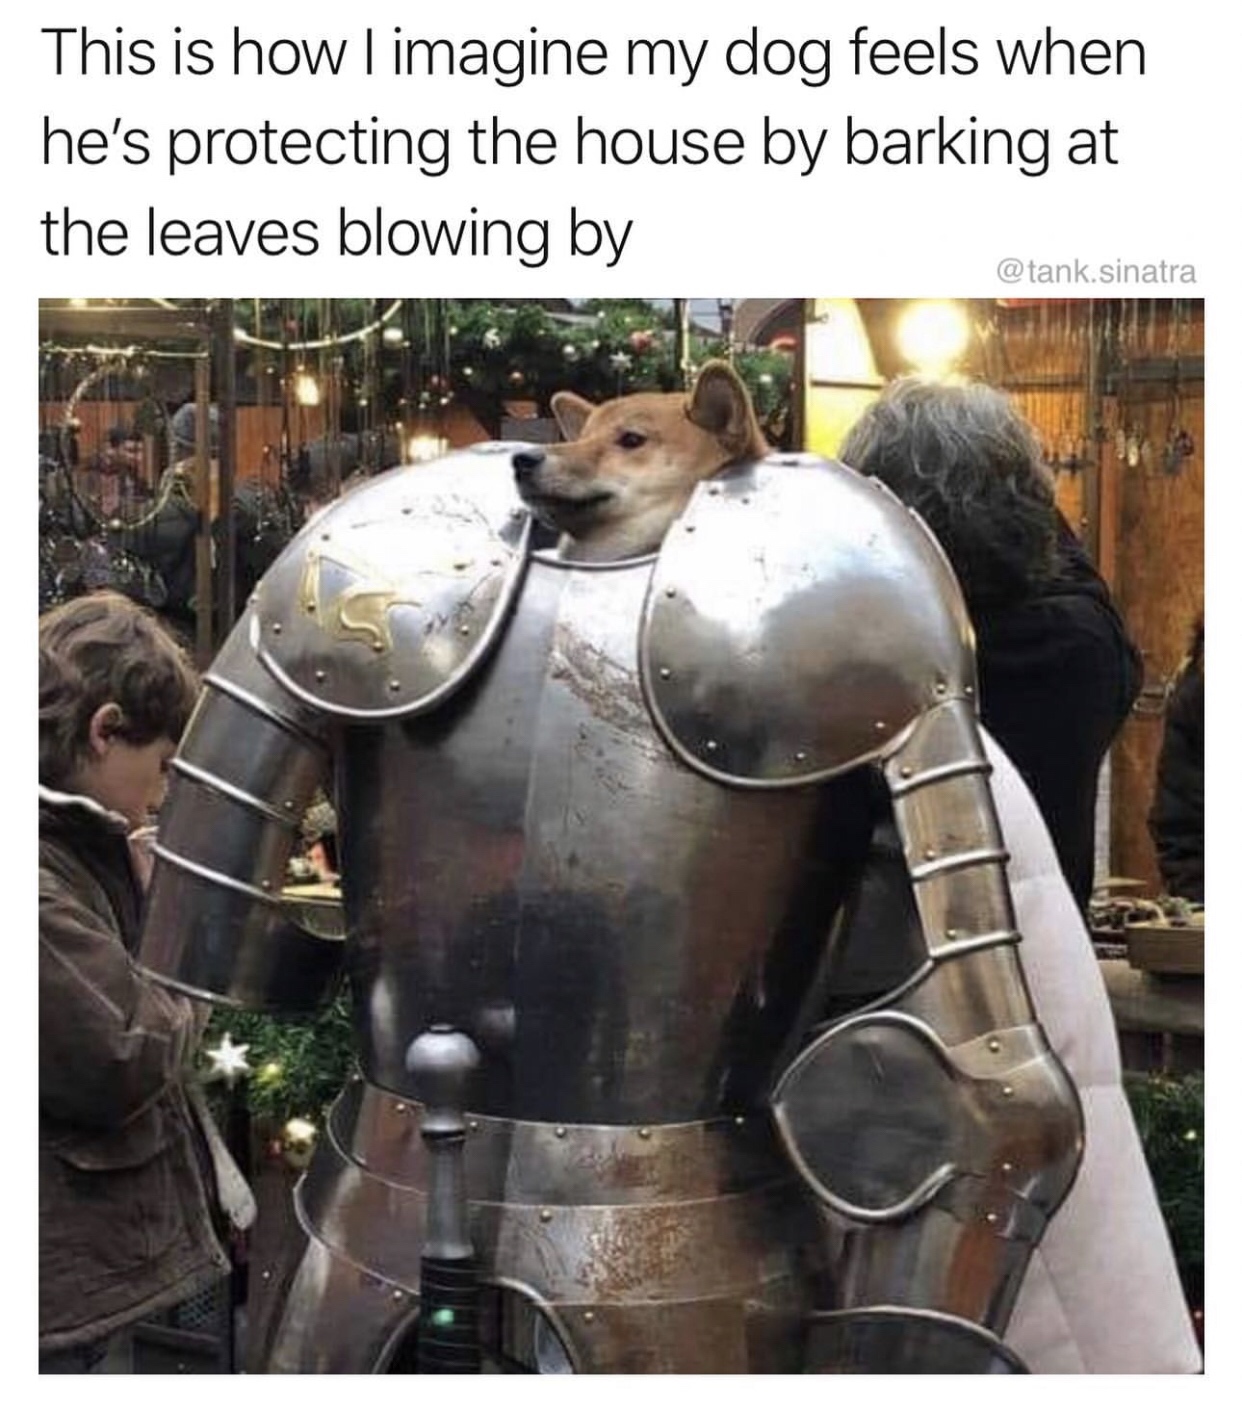 greater dog irl - This is how I imagine my dog feels when he's protecting the house by barking at the leaves blowing by sinatra